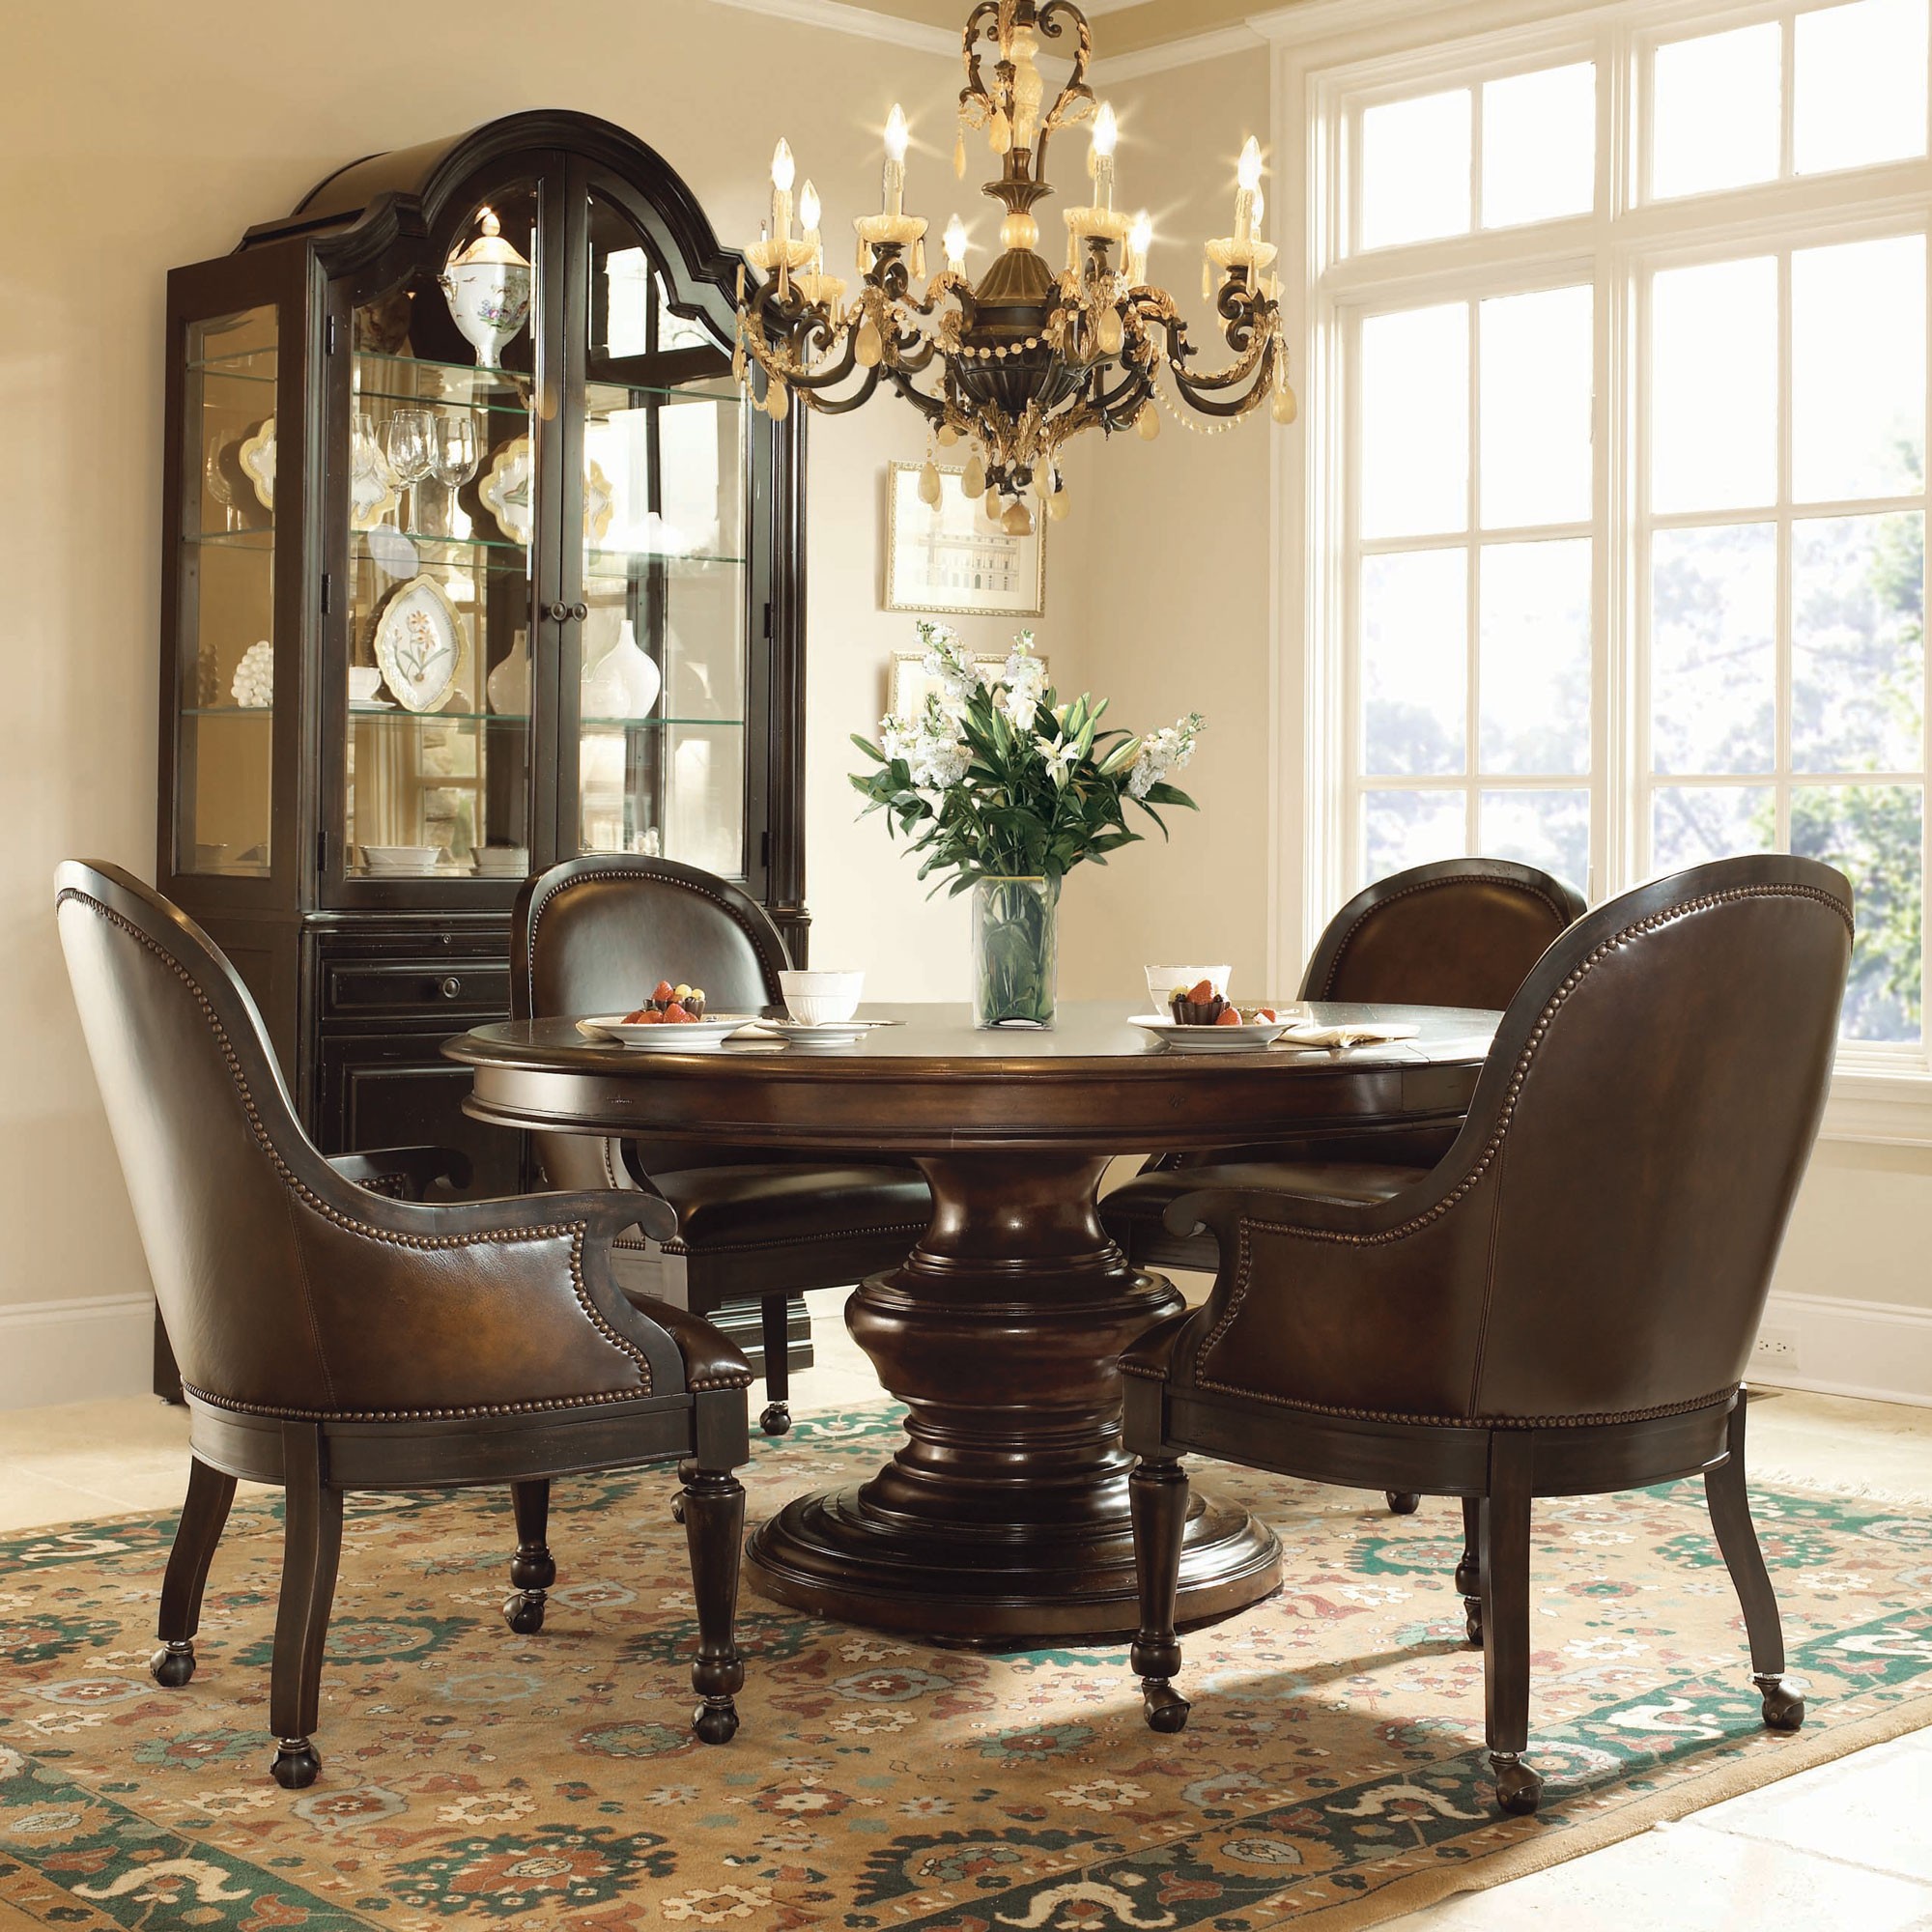 Hillsdale grand bay 5 piece round dining room chairs with